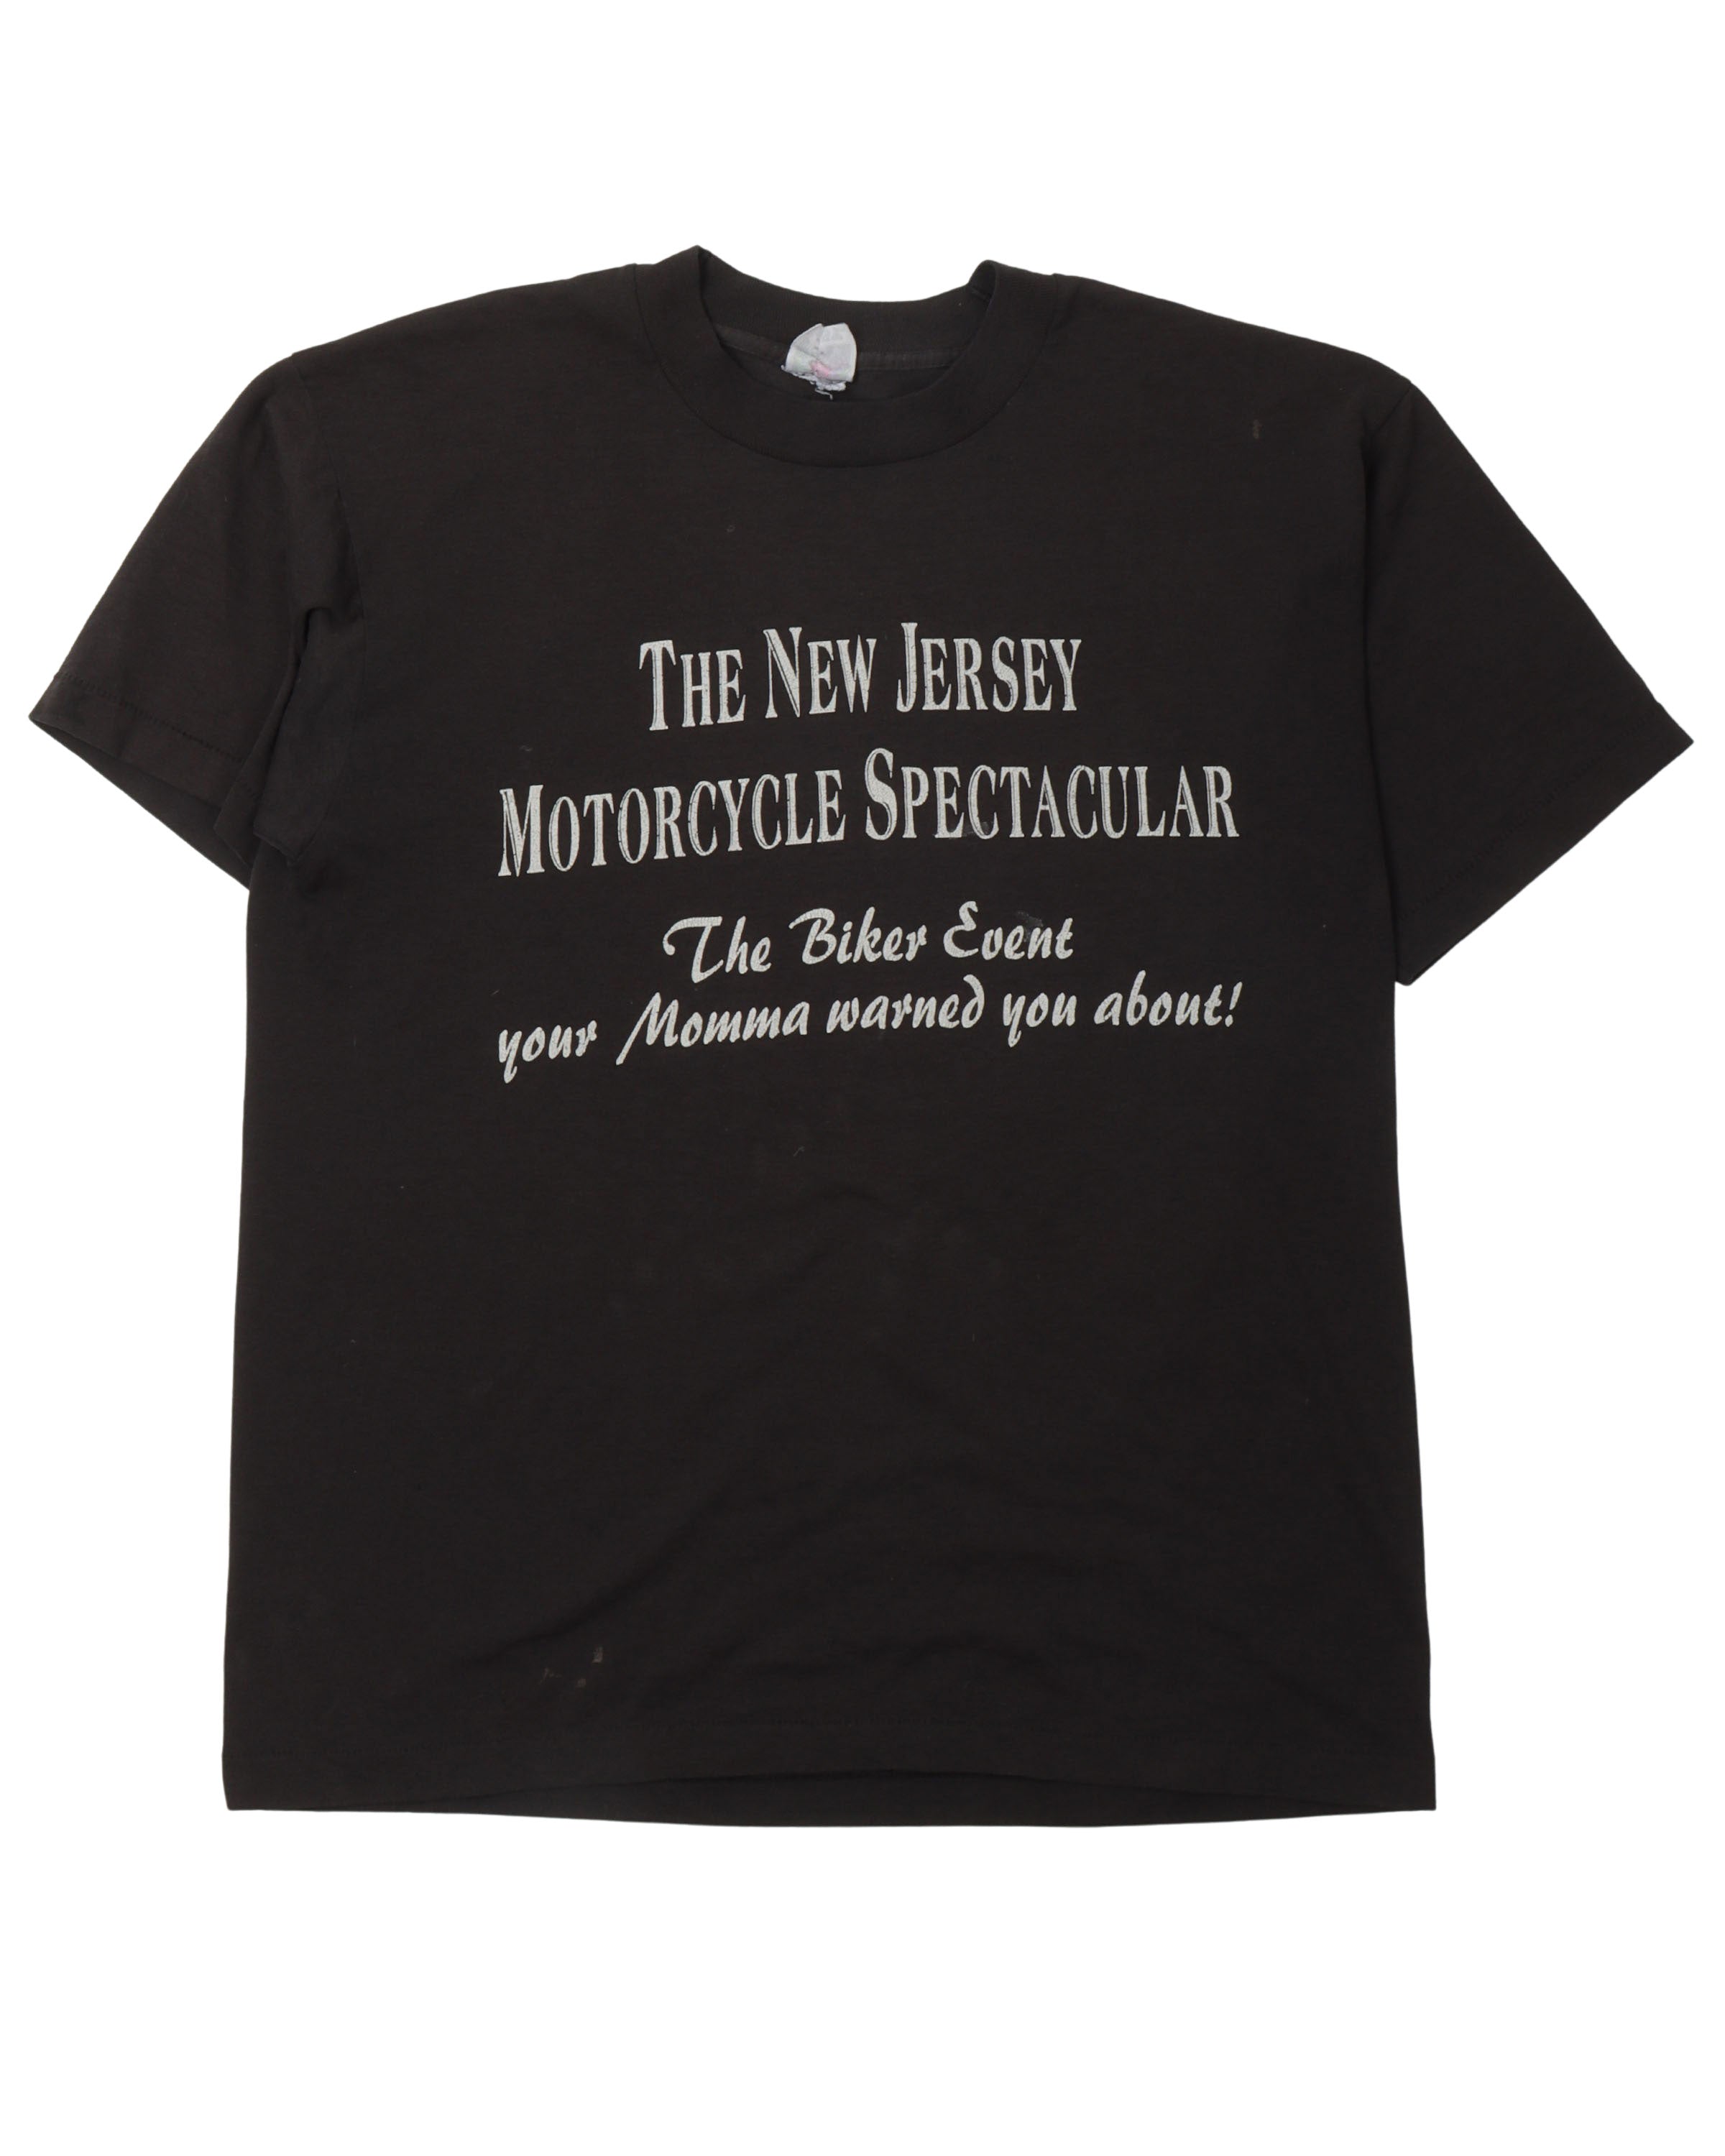 Vintage New Jersey Motorcycle Spectacular T-Shirt